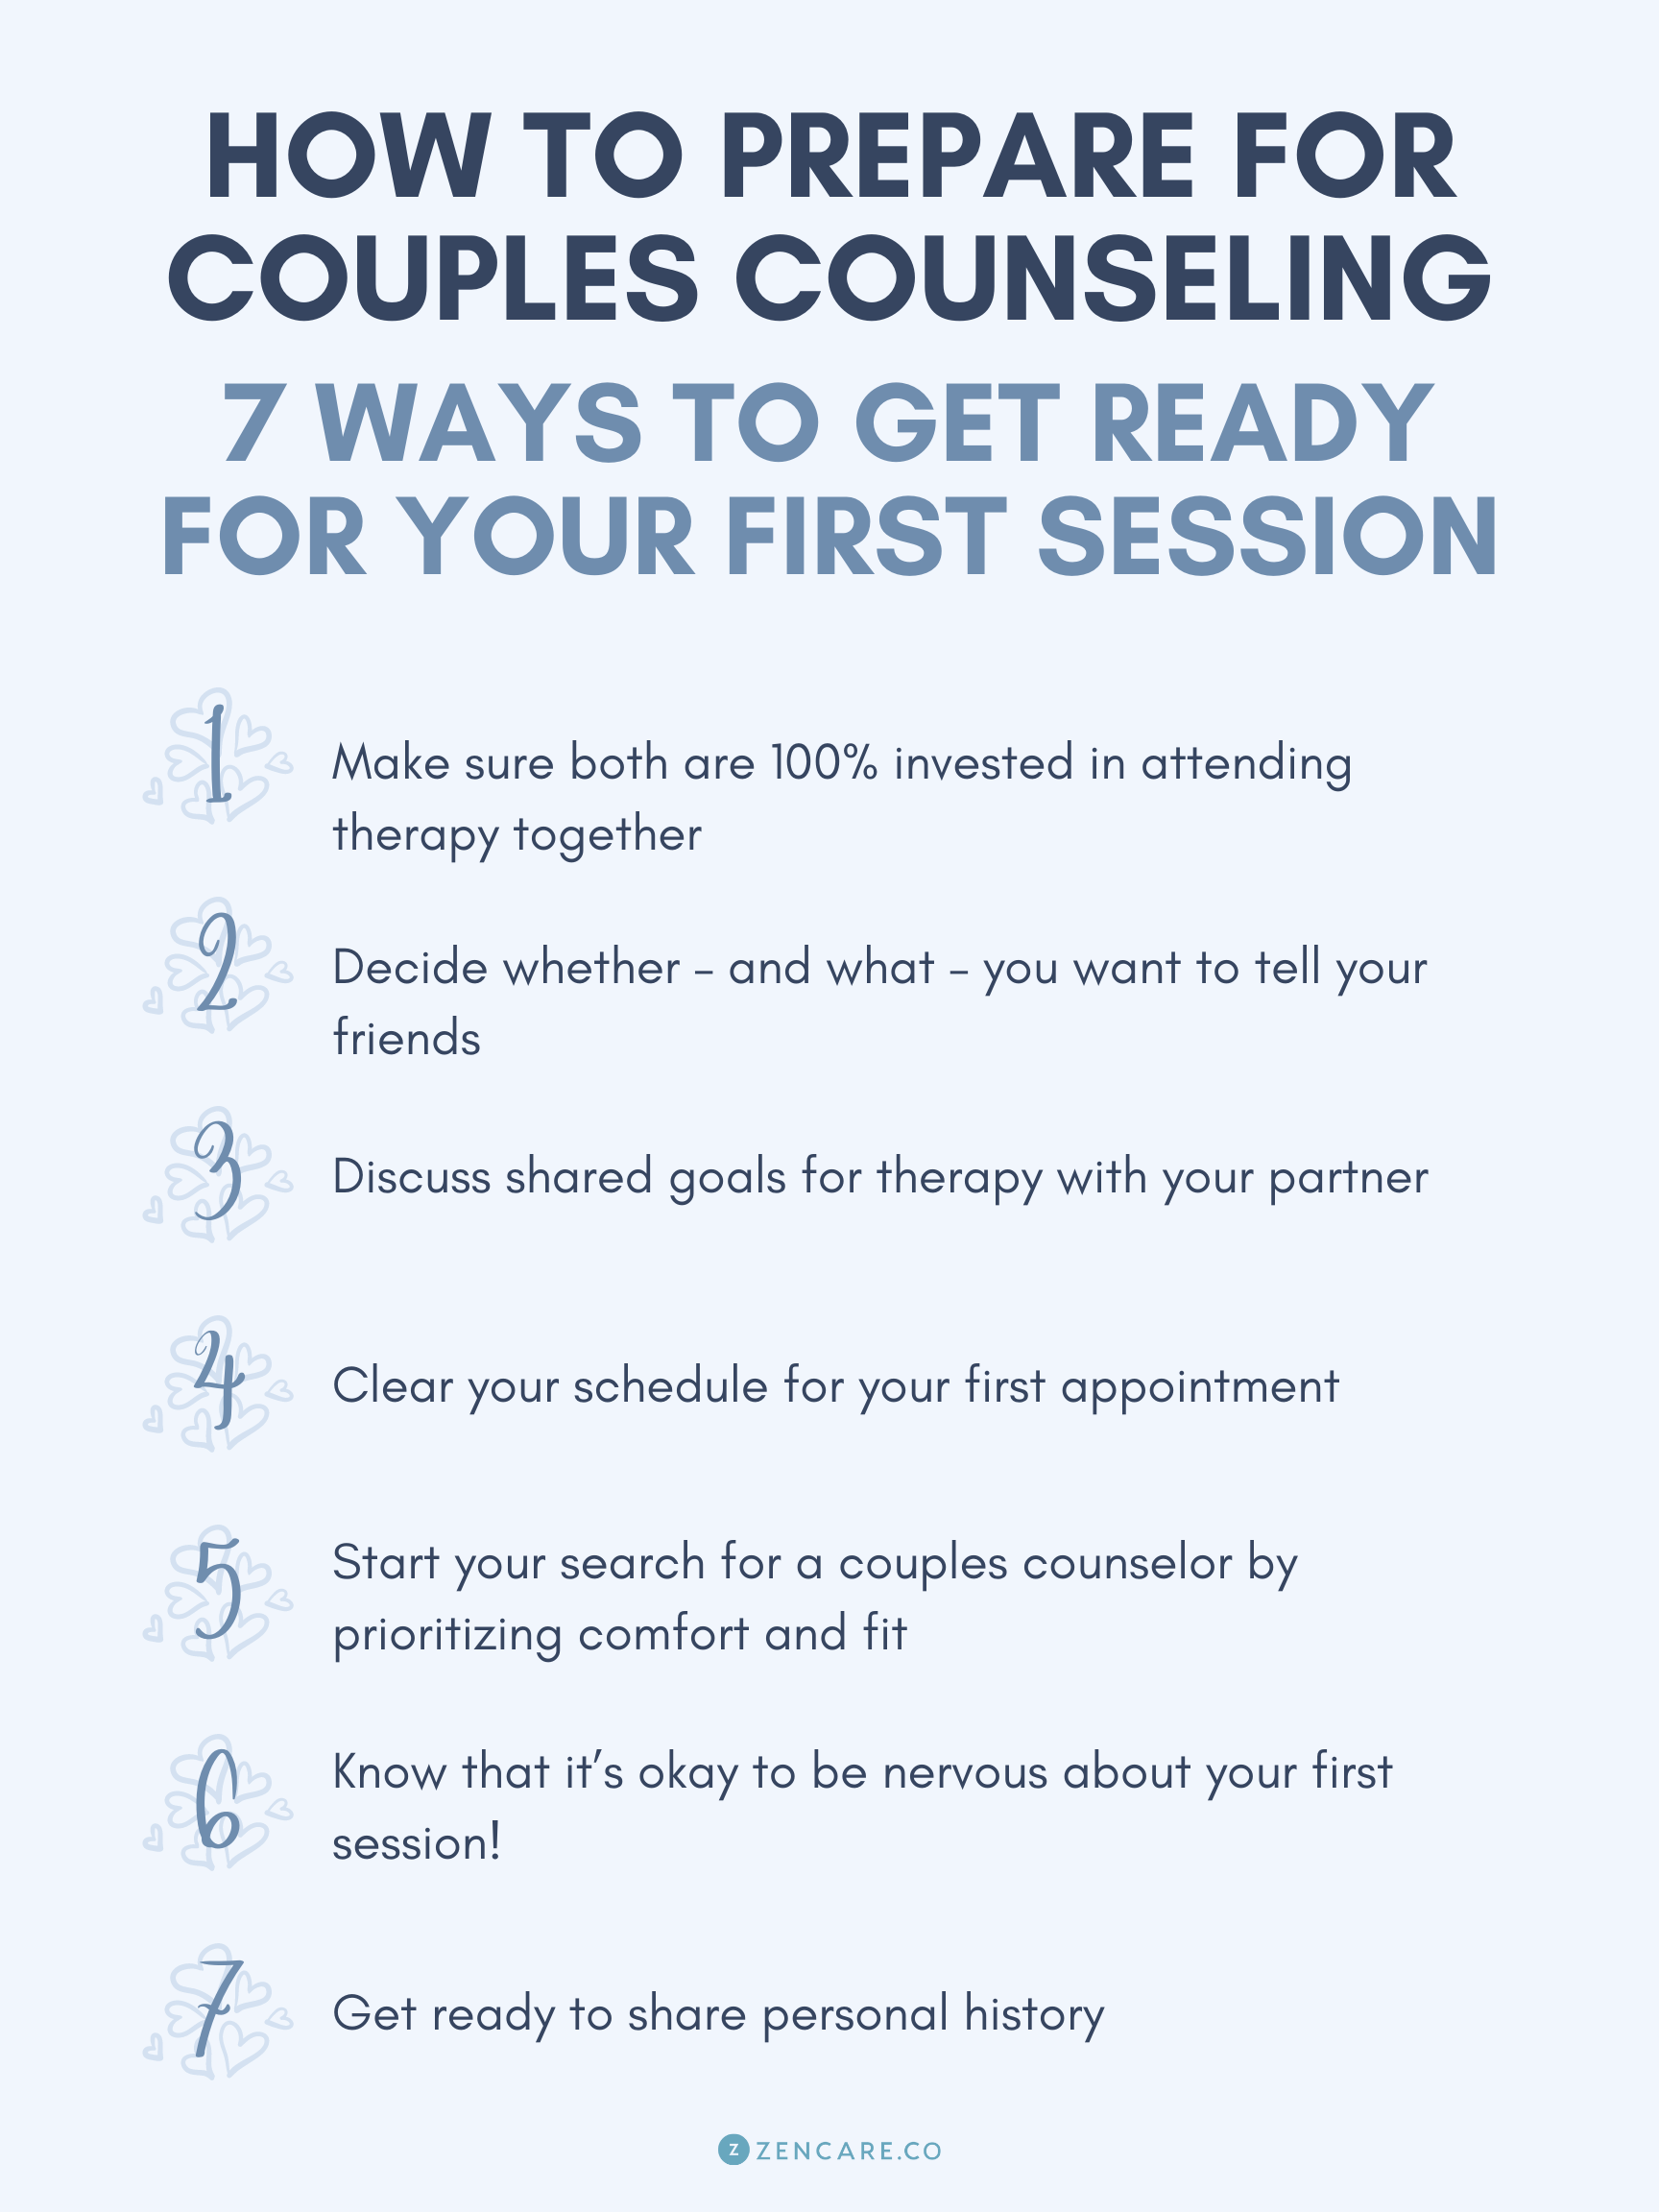 https://zencare.s3.us-east-2.amazonaws.com/blog/How+to+Prepare+for+Couples+Counseling+7+Ways+to+Get+Ready+for+Your+First+Session.png